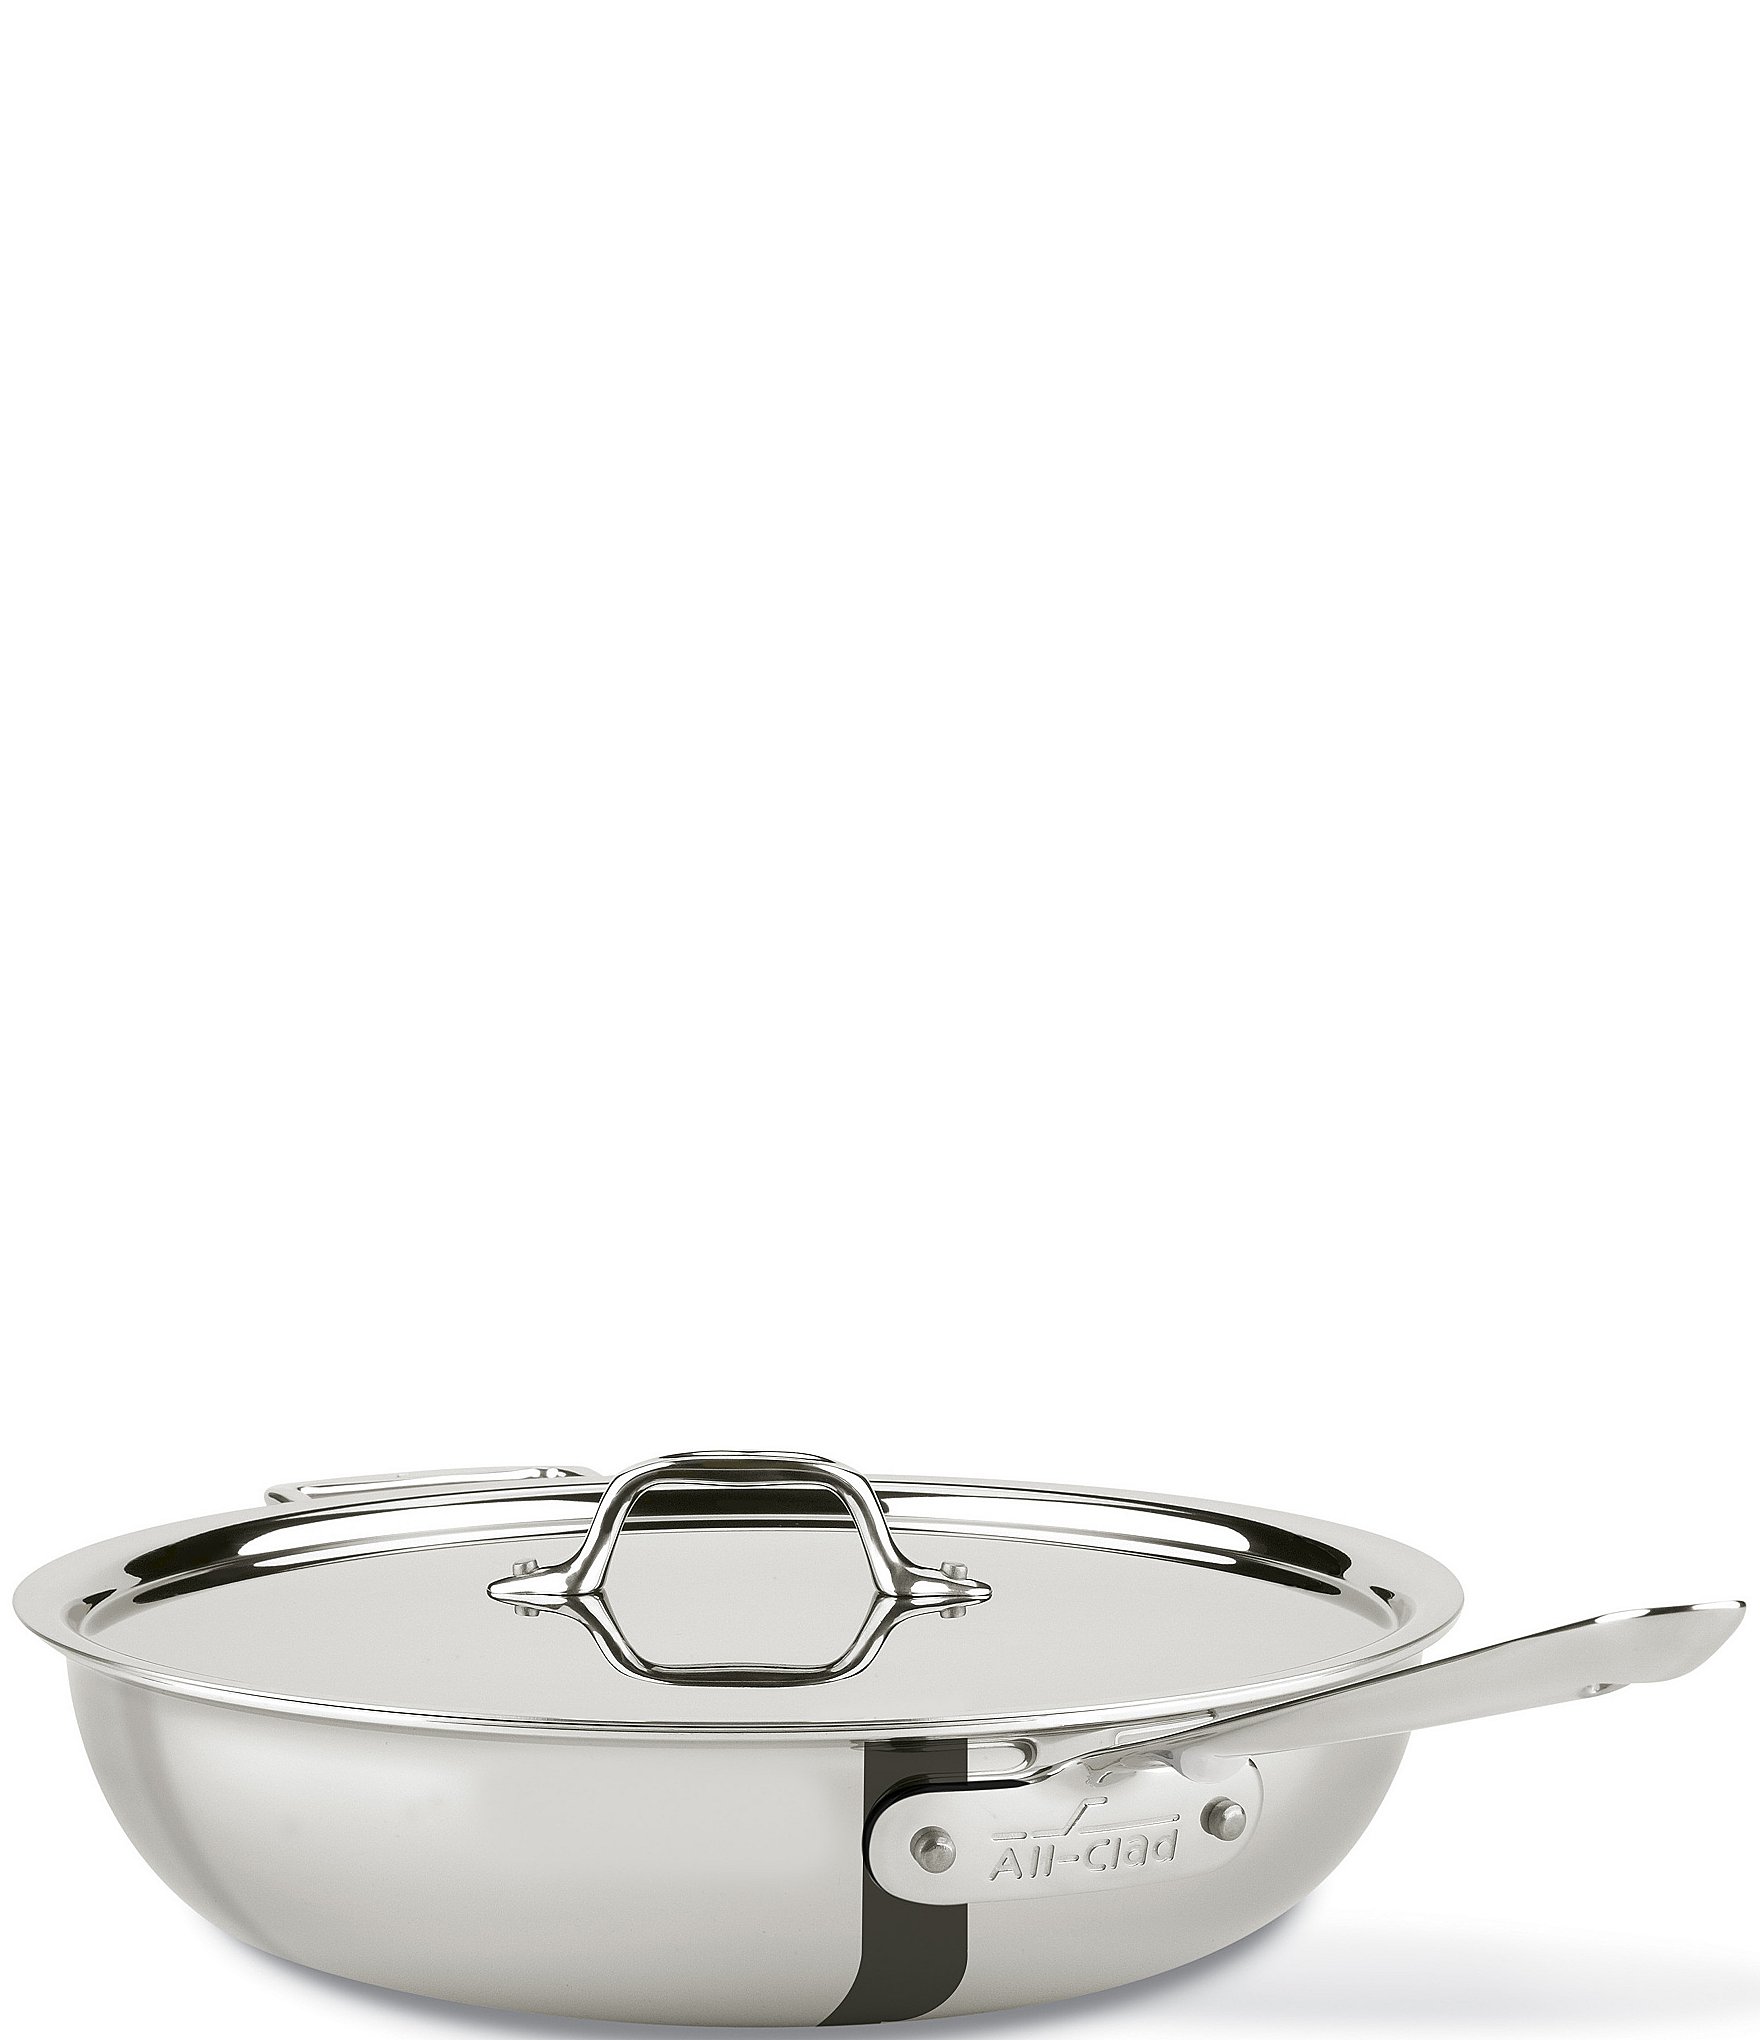 https://dimg.dillards.com/is/image/DillardsZoom/zoom/all-clad-d3-stainless-3-ply-bonded-cookware-weeknight-pan-with-lid-4-quart/00000000_zi_20417906.jpg